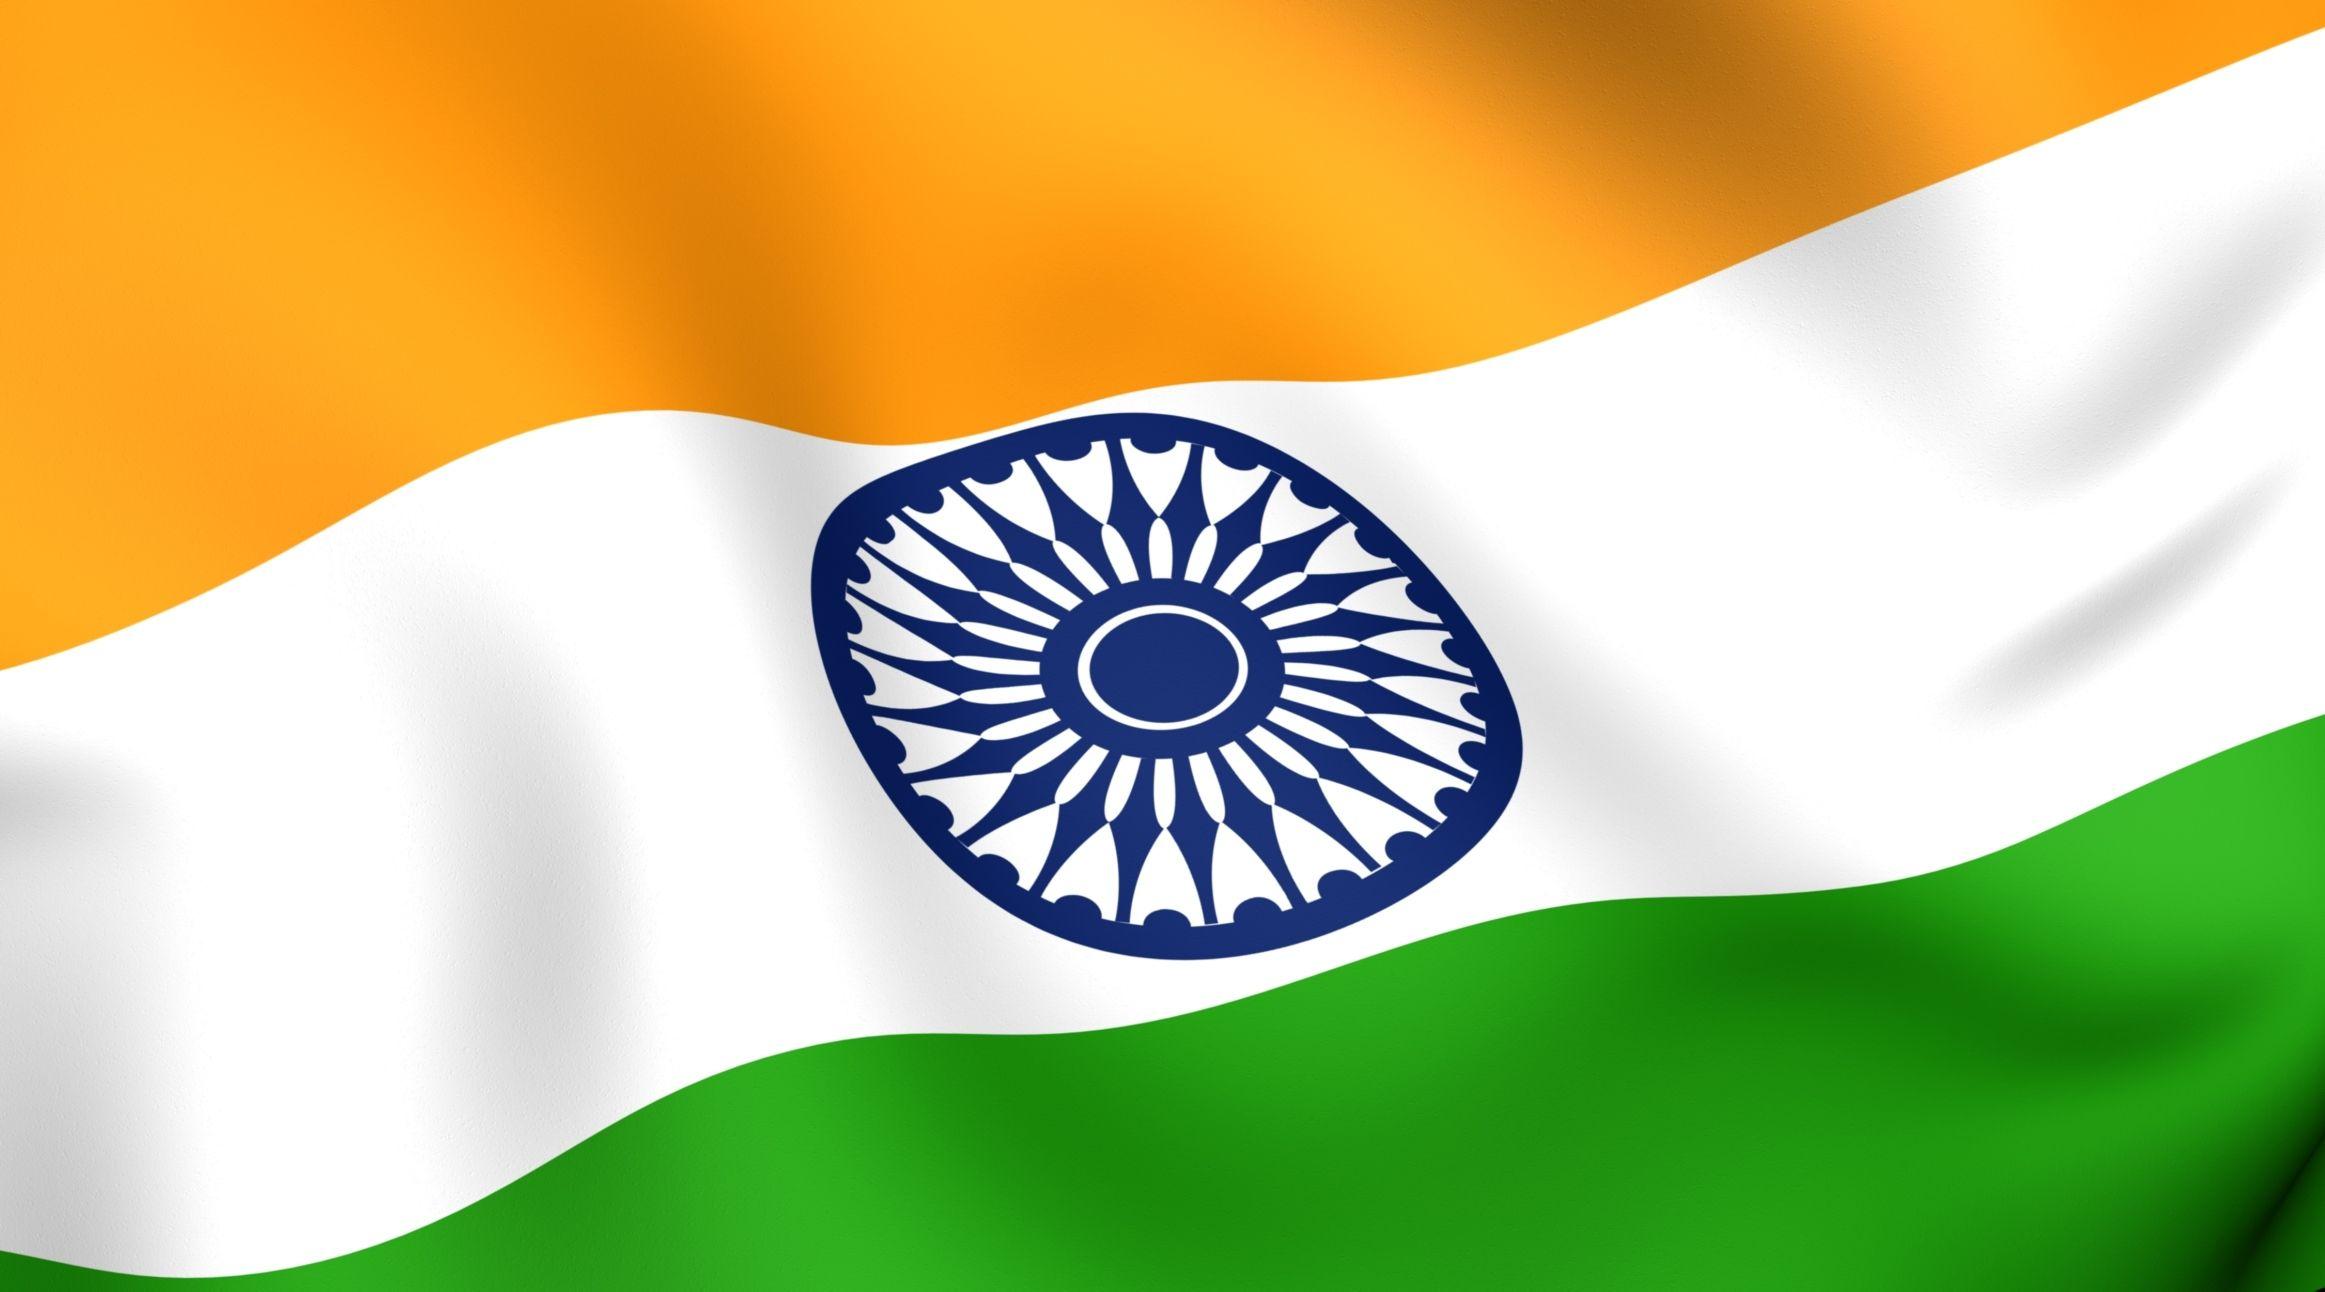 Indian Flag Wallpapers & HD Image 2018 [Free Download]